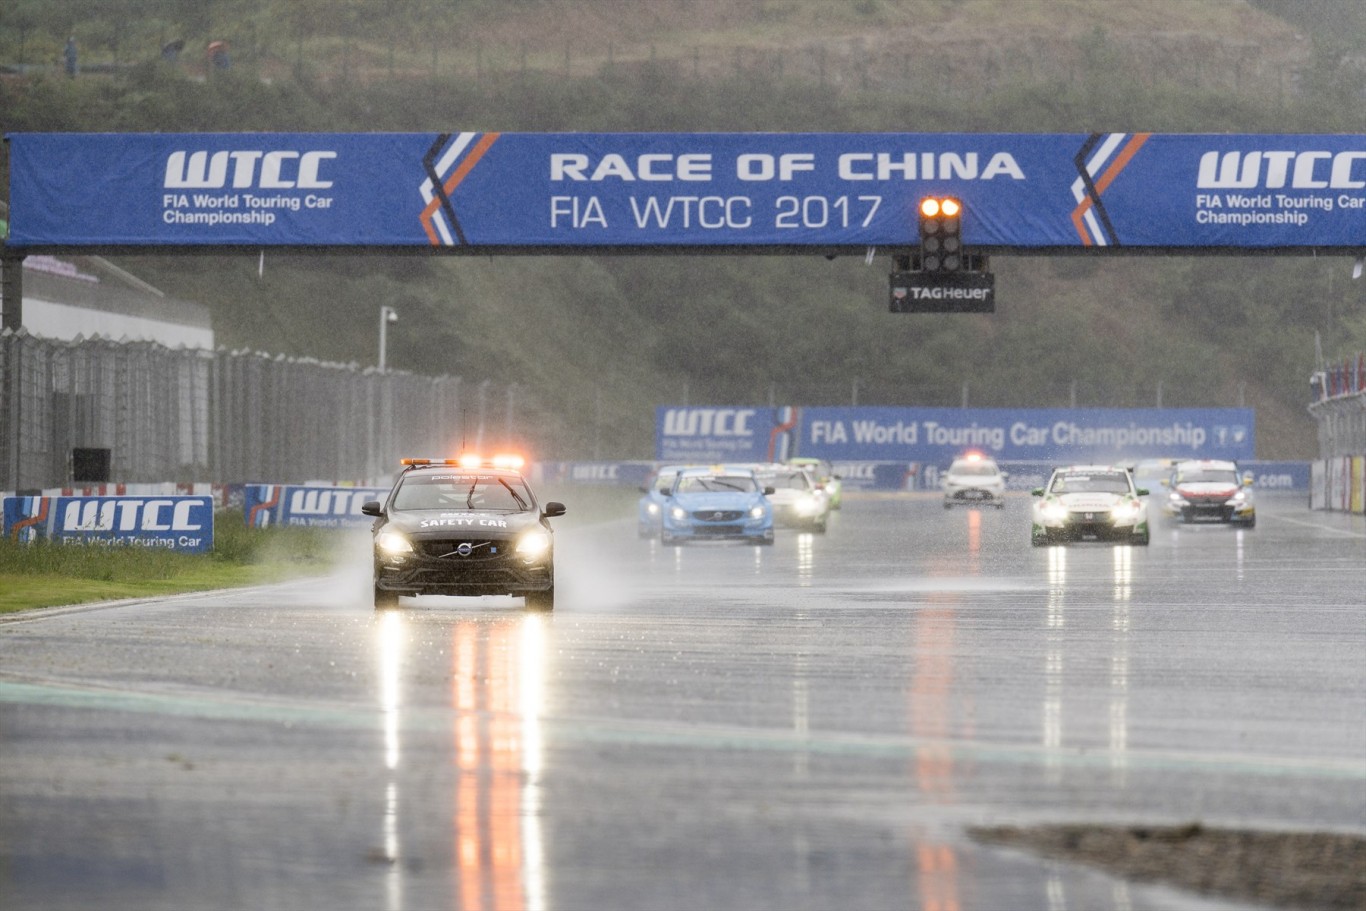 Néstor Girolami wins in China as Thed Björk claims WTCC lead by half a point